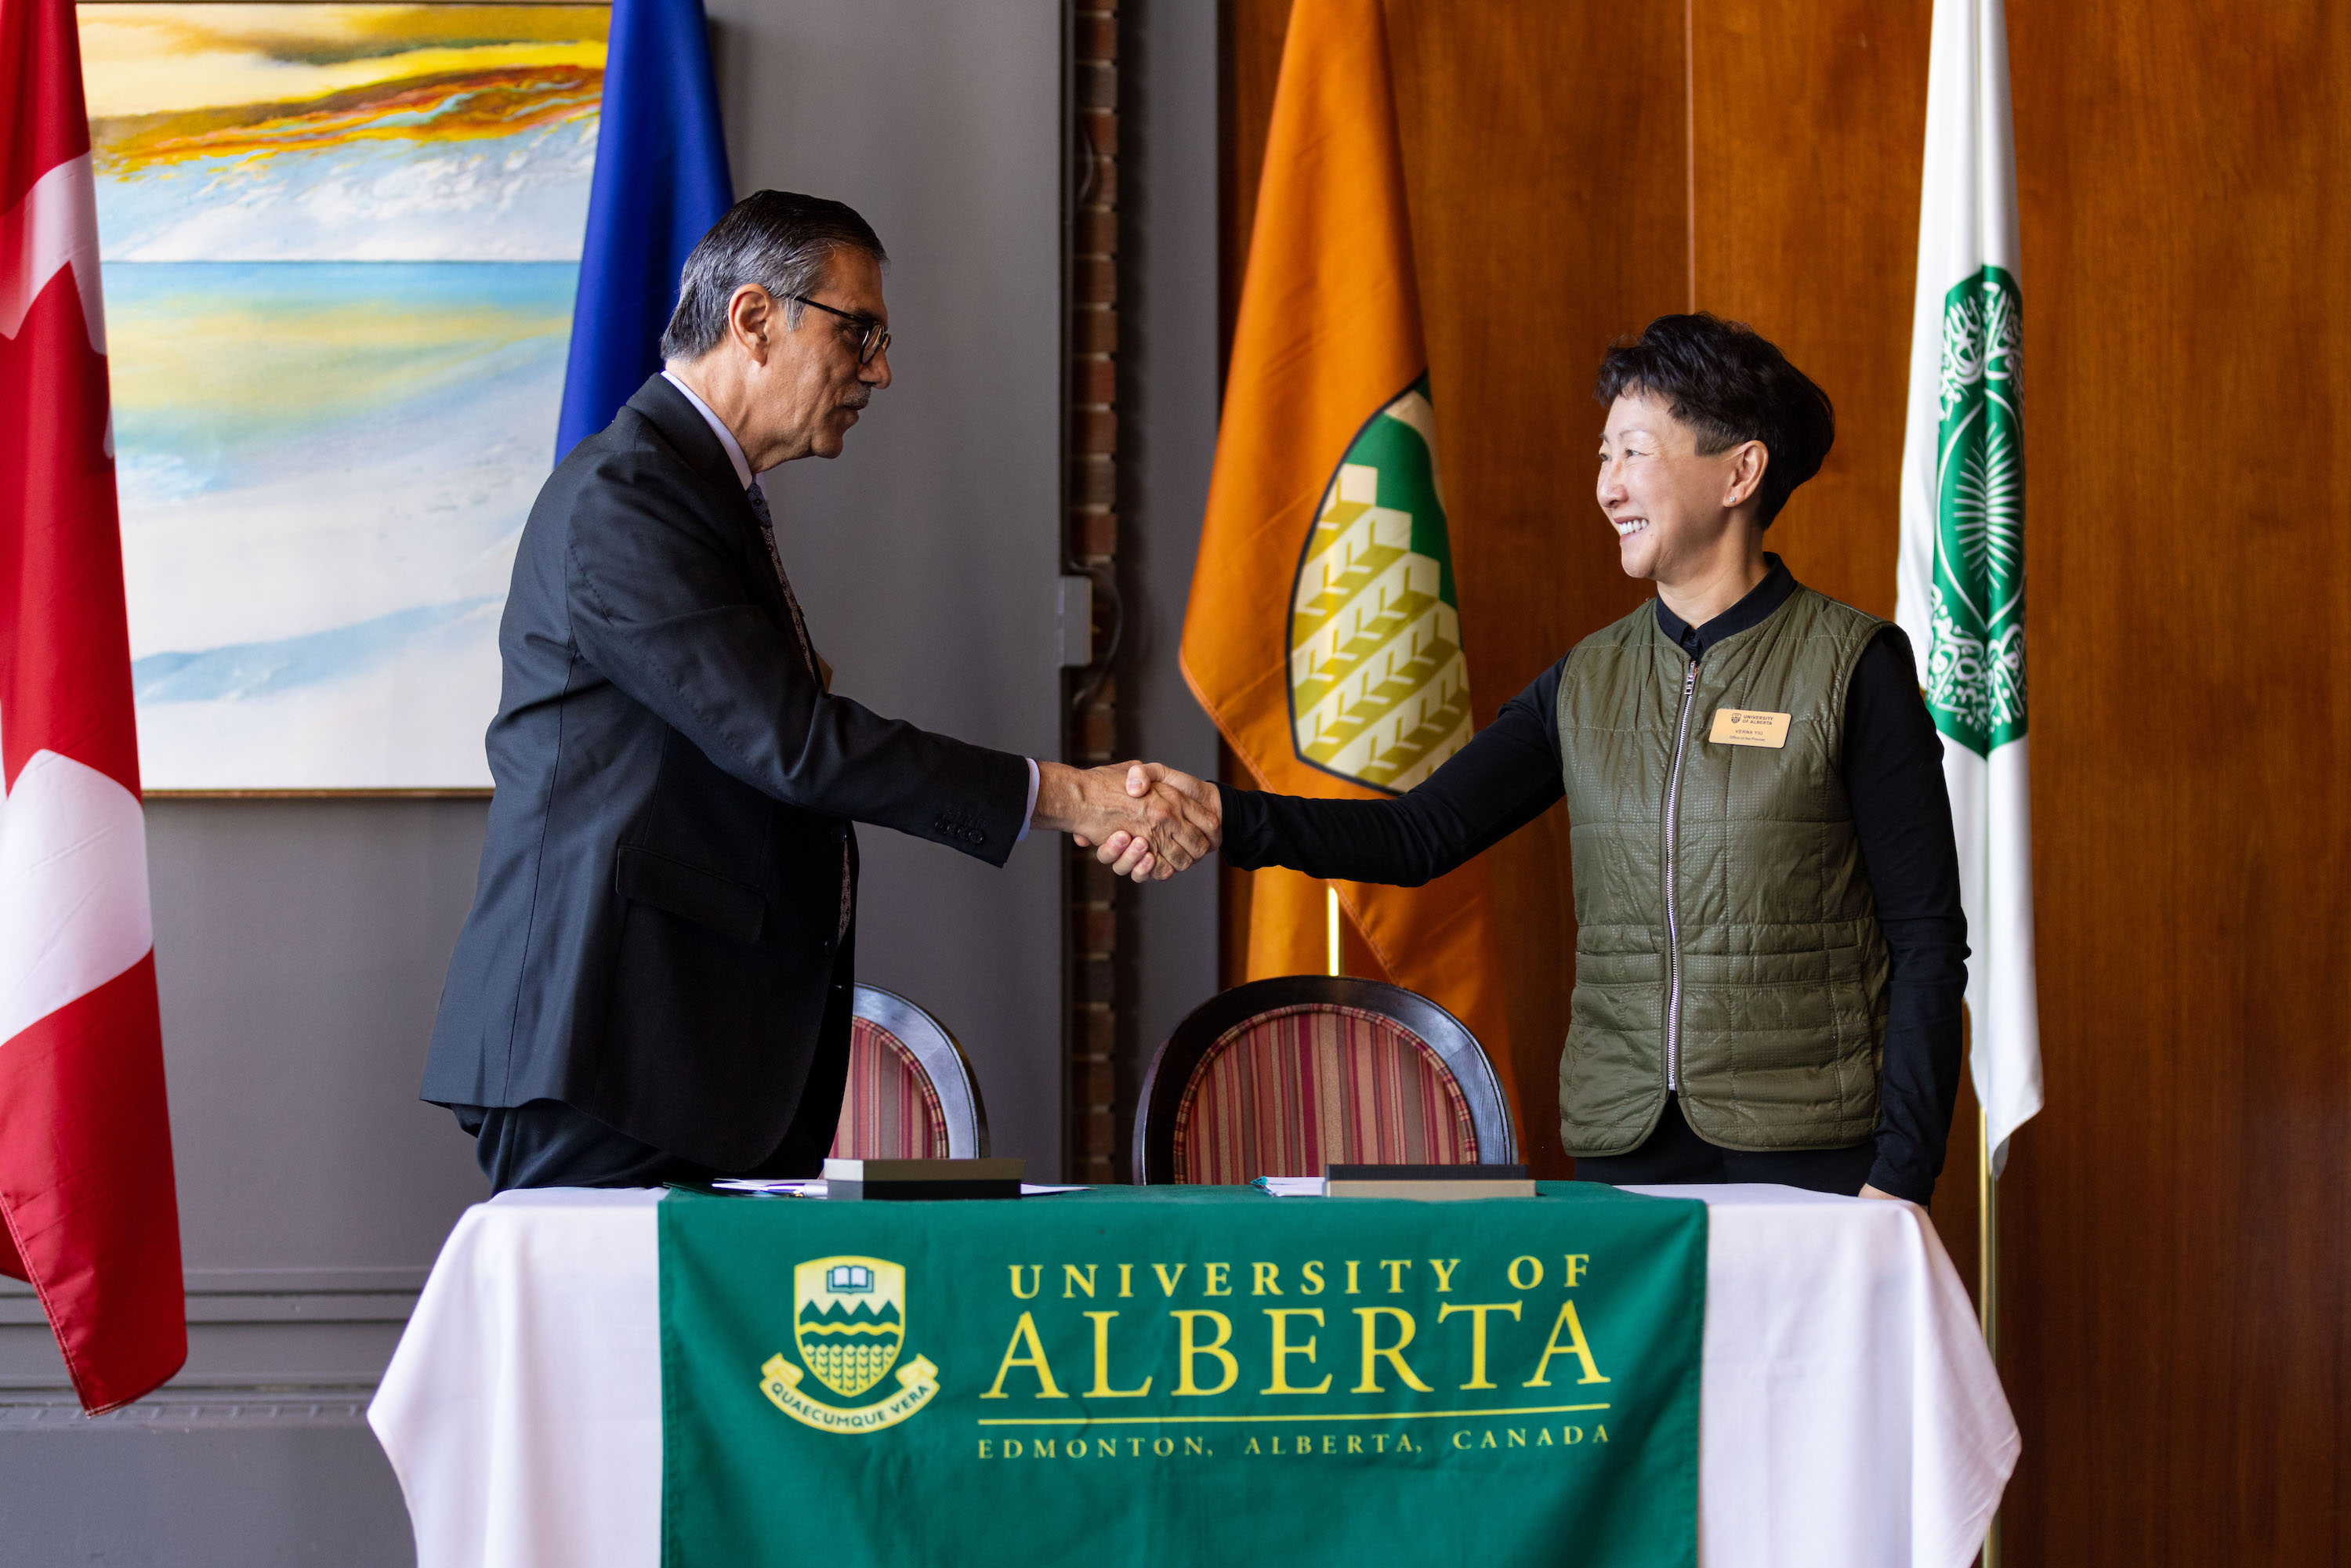 dr. Shahabuddin and dr. Yiu shake hands in front of U of A flags